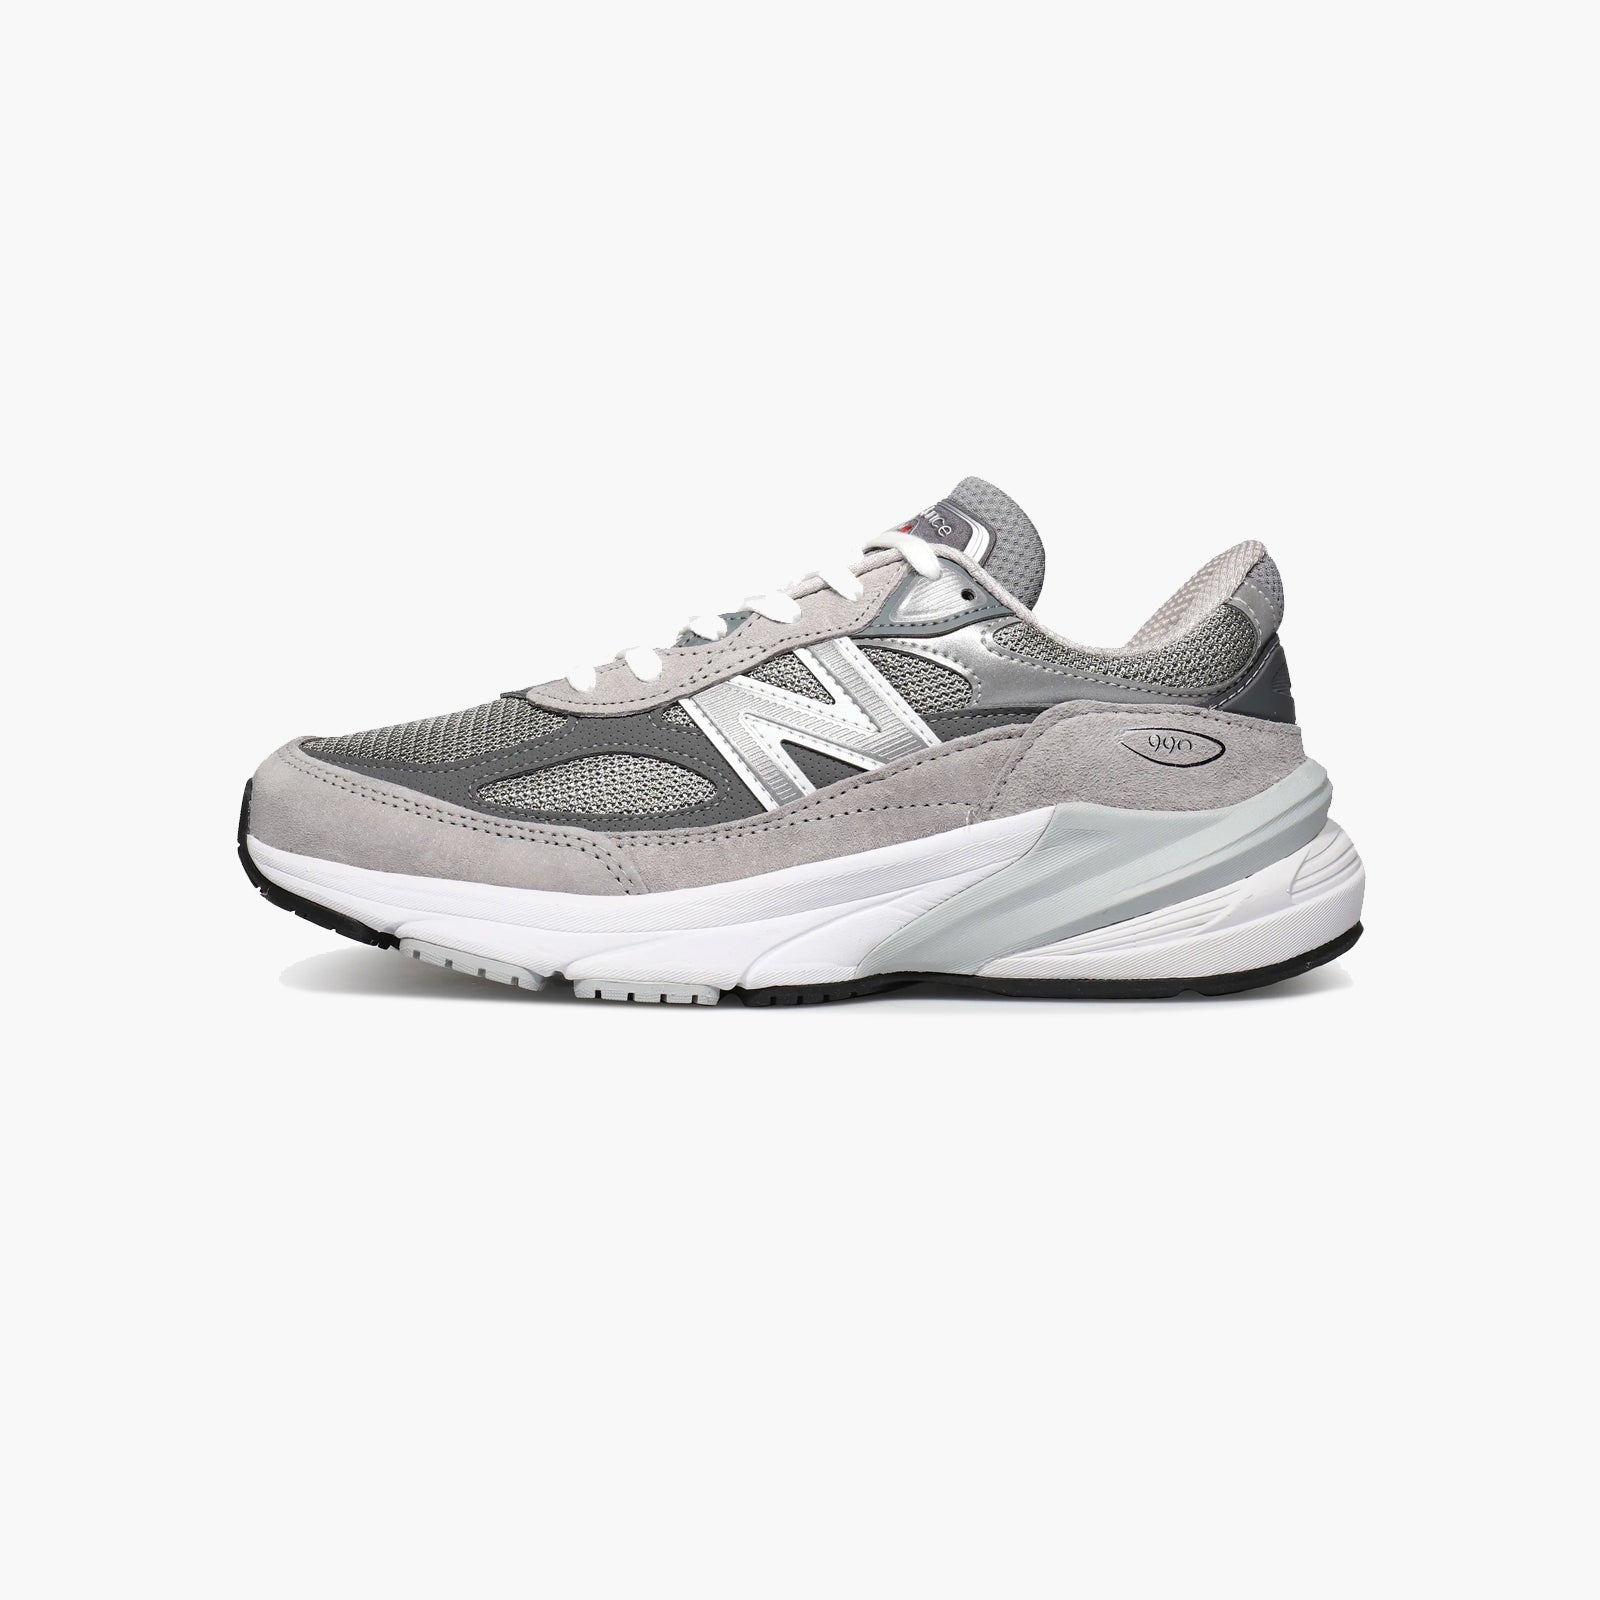 New Balance 990v6 Made in USA Women’s-SUEDE Store